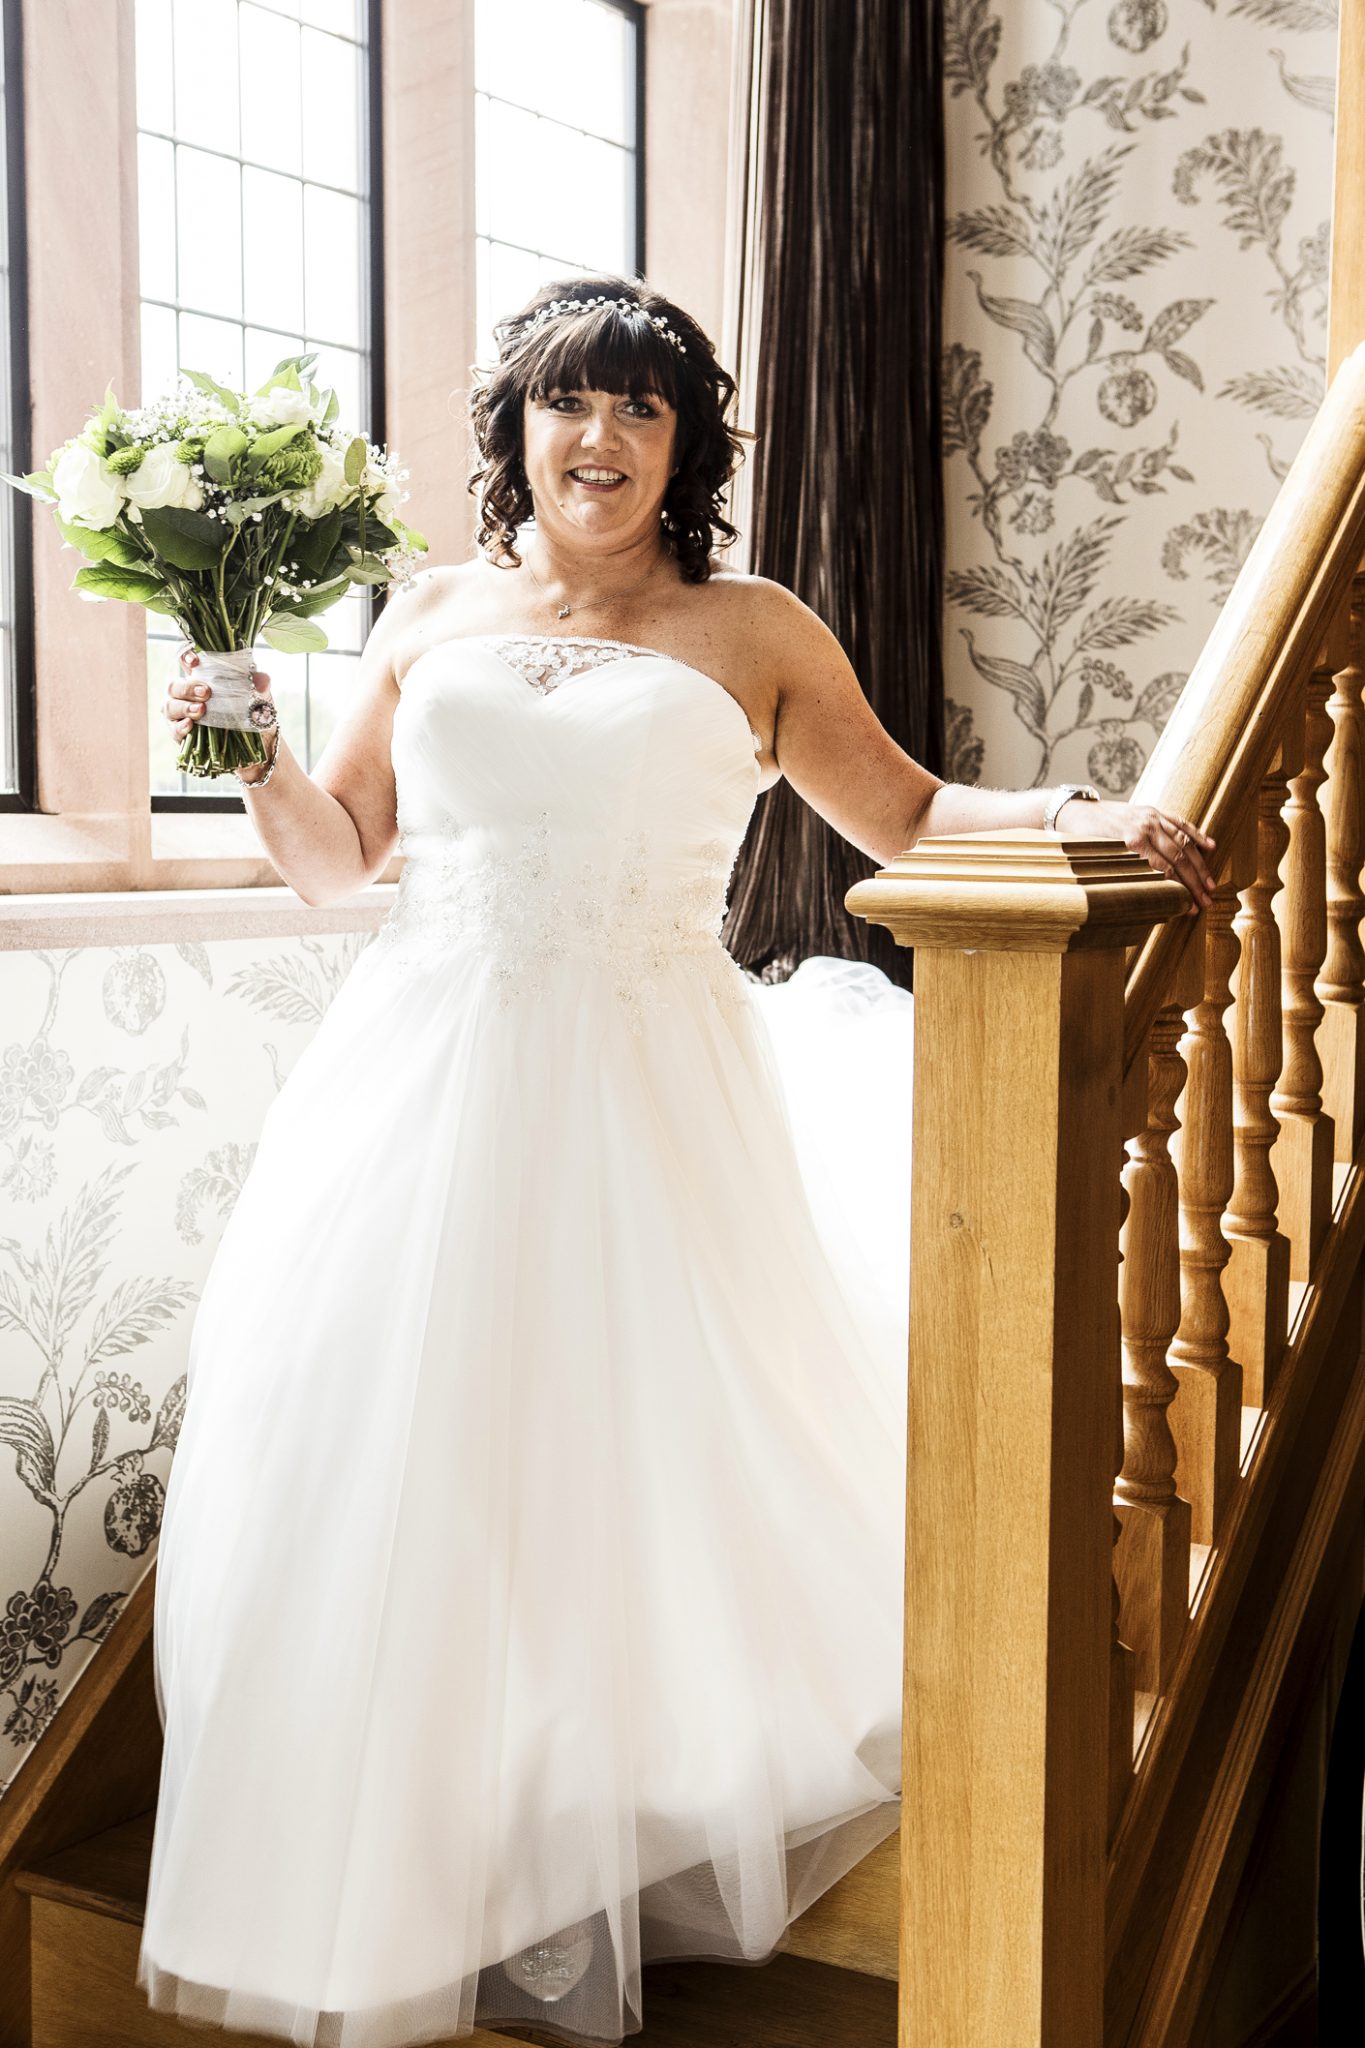 wedding-photography-of-the-bride-in-her-wedding-dress-at-merrydale-manor-knutsford-cheshire